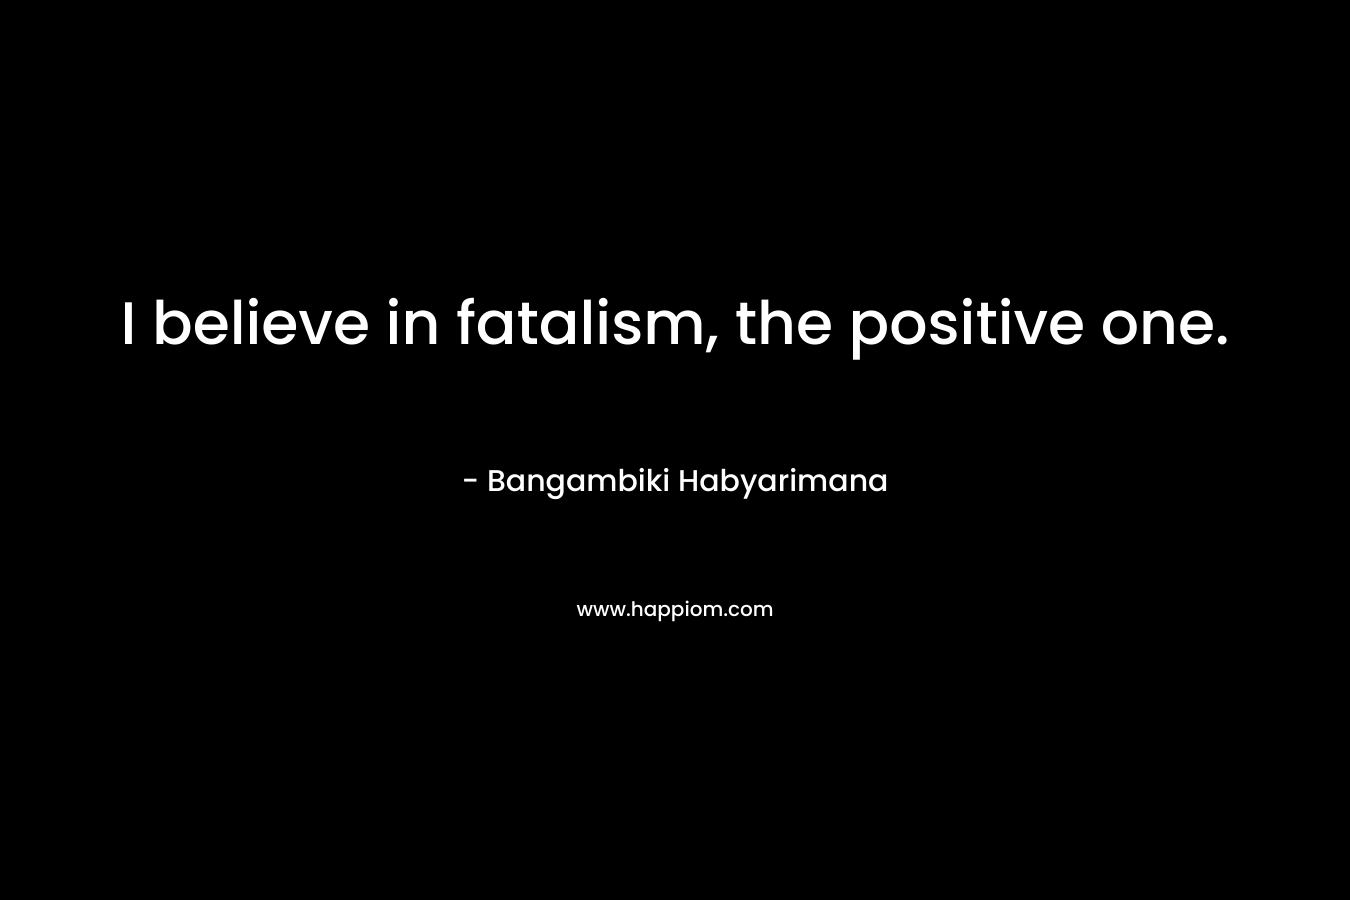 I believe in fatalism, the positive one.